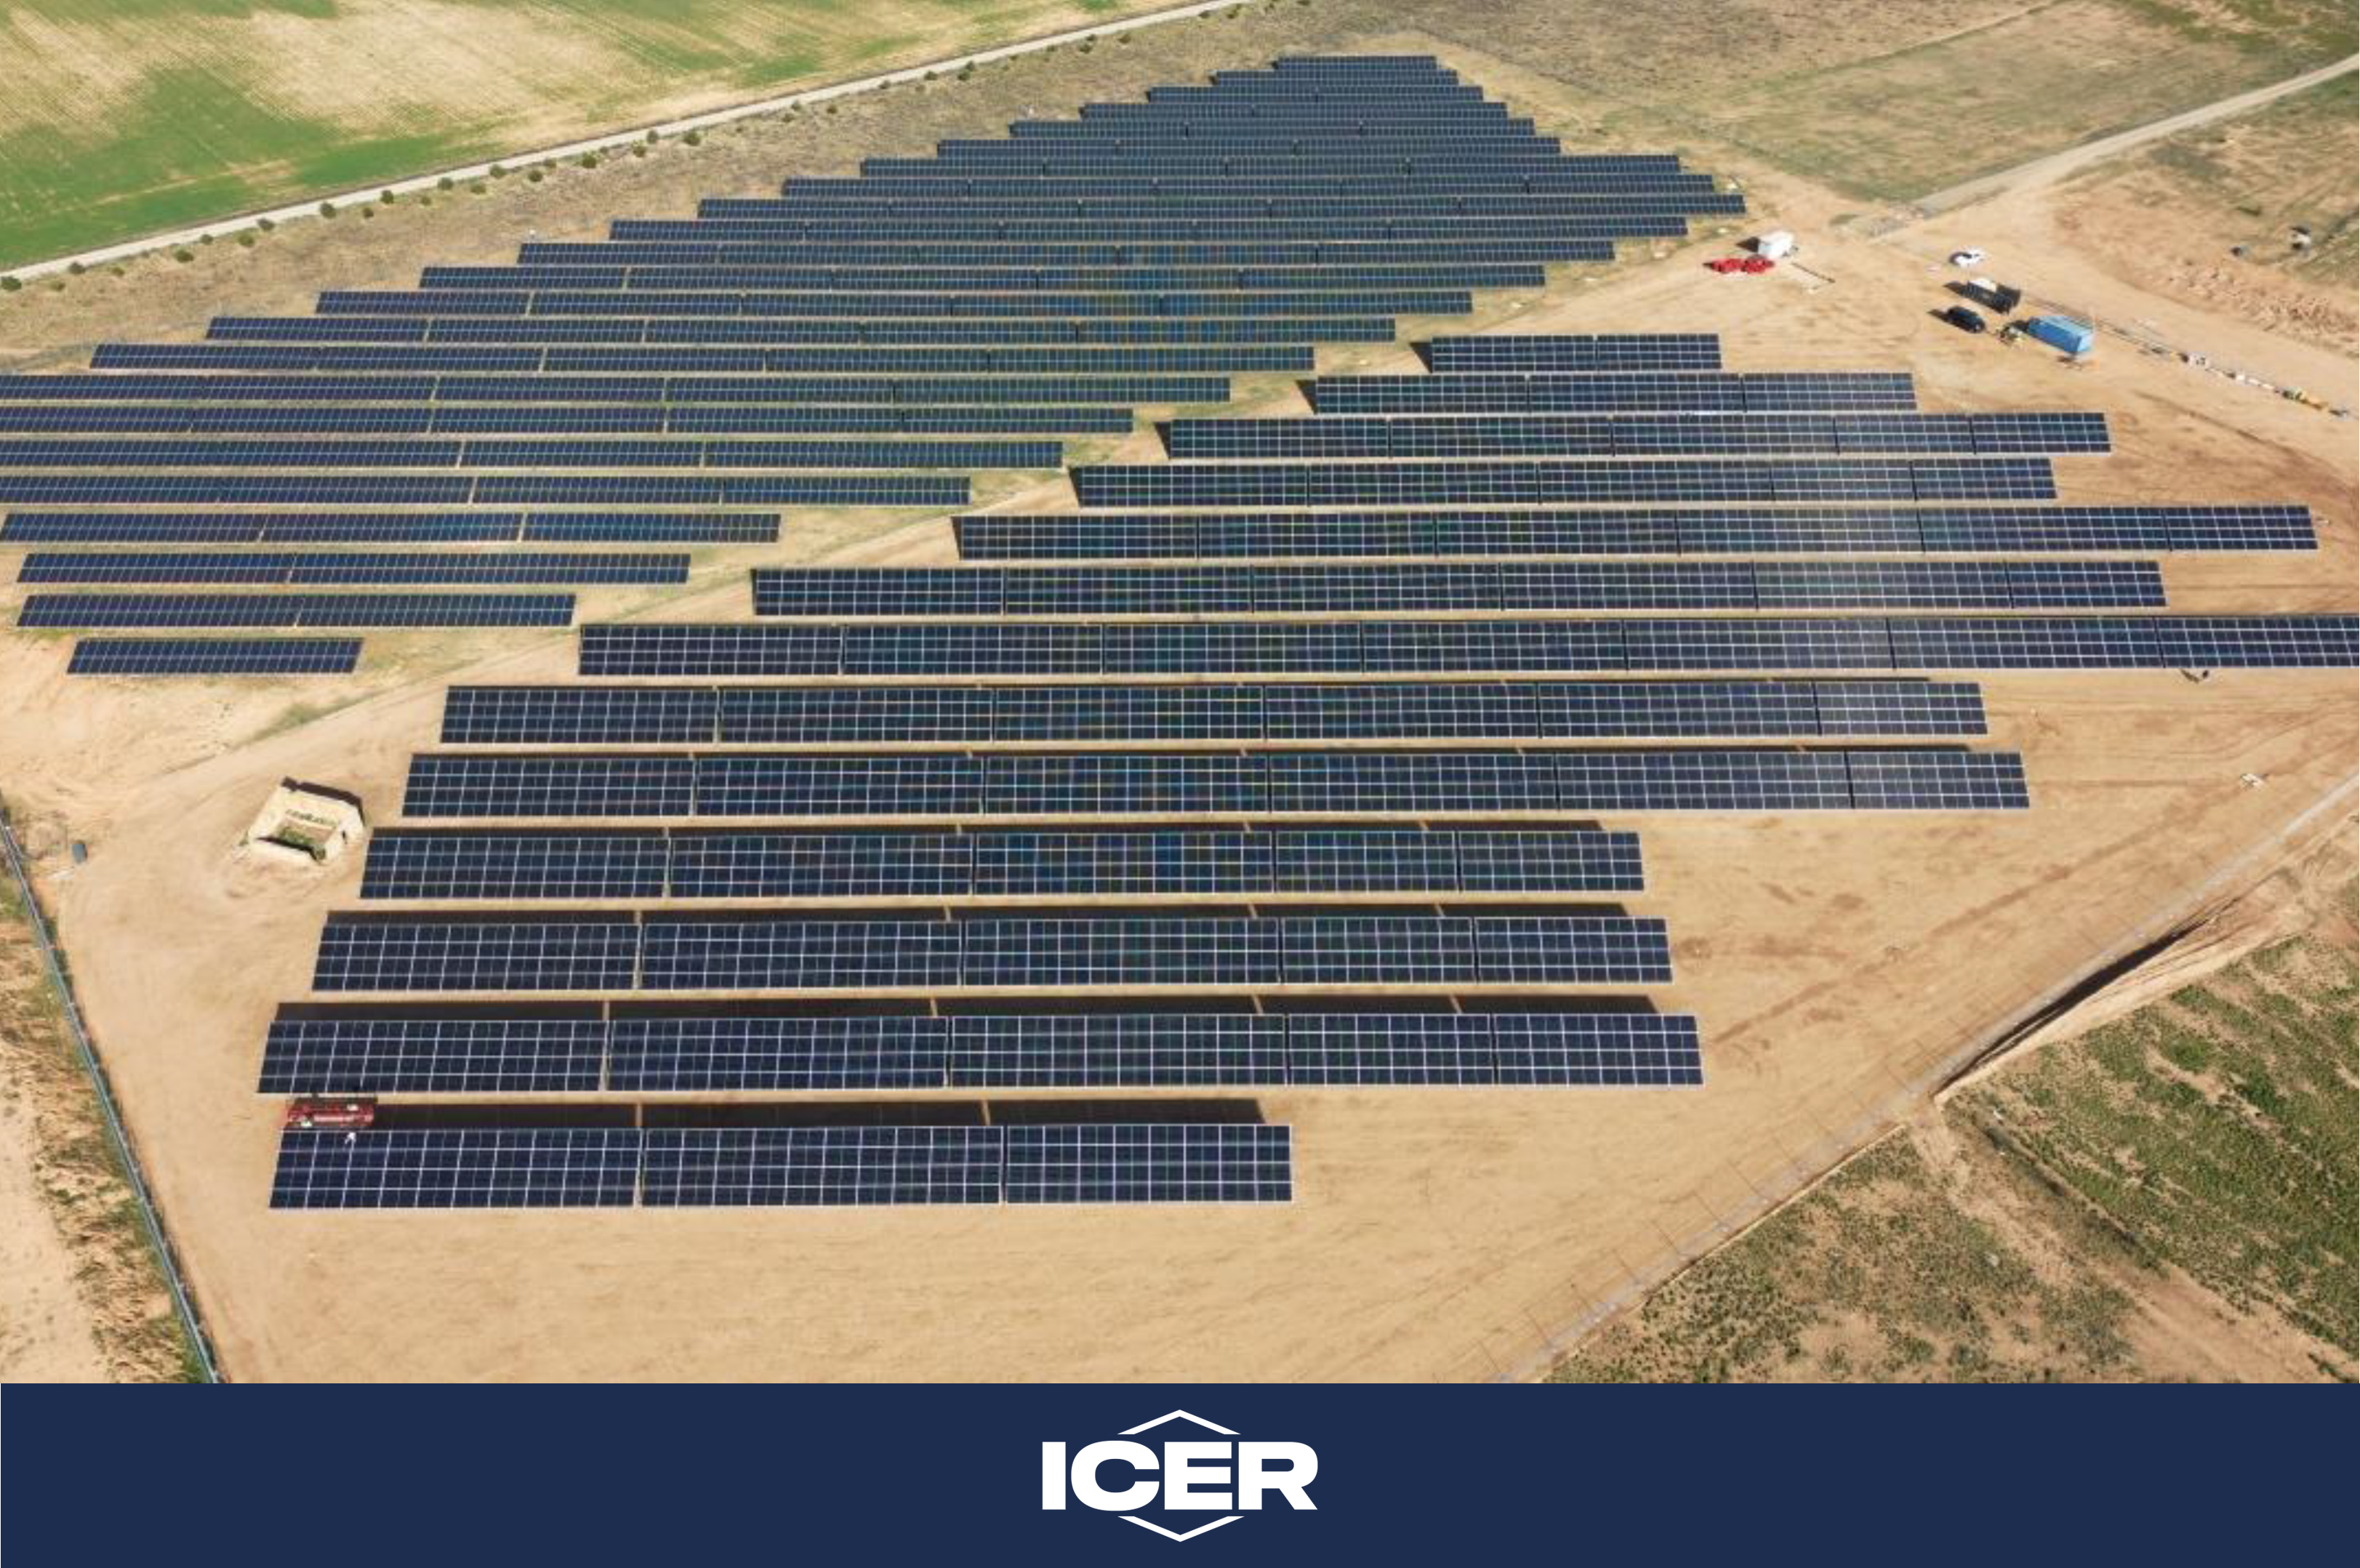 ICER makes progress on photovoltaic plant expansion work